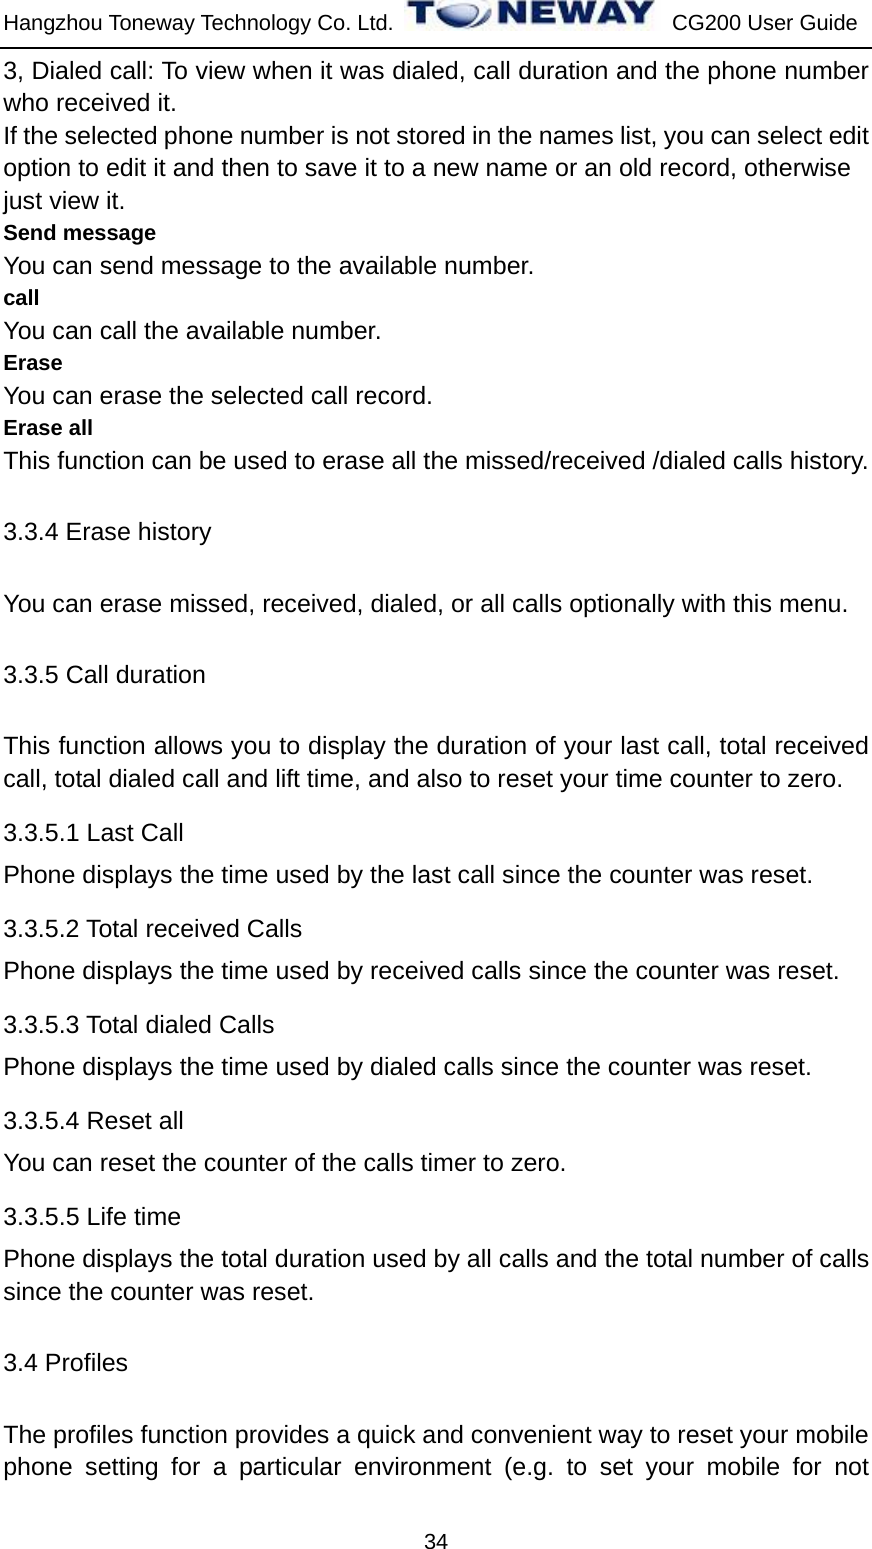 Hangzhou Toneway Technology Co. Ltd.    CG200 User Guide 34 3, Dialed call: To view when it was dialed, call duration and the phone number who received it. If the selected phone number is not stored in the names list, you can select edit   option to edit it and then to save it to a new name or an old record, otherwise   just view it. Send message You can send message to the available number. call You can call the available number. Erase You can erase the selected call record. Erase all This function can be used to erase all the missed/received /dialed calls history. 3.3.4 Erase history You can erase missed, received, dialed, or all calls optionally with this menu. 3.3.5 Call duration This function allows you to display the duration of your last call, total received call, total dialed call and lift time, and also to reset your time counter to zero. 3.3.5.1 Last Call Phone displays the time used by the last call since the counter was reset. 3.3.5.2 Total received Calls Phone displays the time used by received calls since the counter was reset. 3.3.5.3 Total dialed Calls Phone displays the time used by dialed calls since the counter was reset. 3.3.5.4 Reset all You can reset the counter of the calls timer to zero.   3.3.5.5 Life time Phone displays the total duration used by all calls and the total number of calls since the counter was reset. 3.4 Profiles The profiles function provides a quick and convenient way to reset your mobile phone setting for a particular environment (e.g. to set your mobile for not 